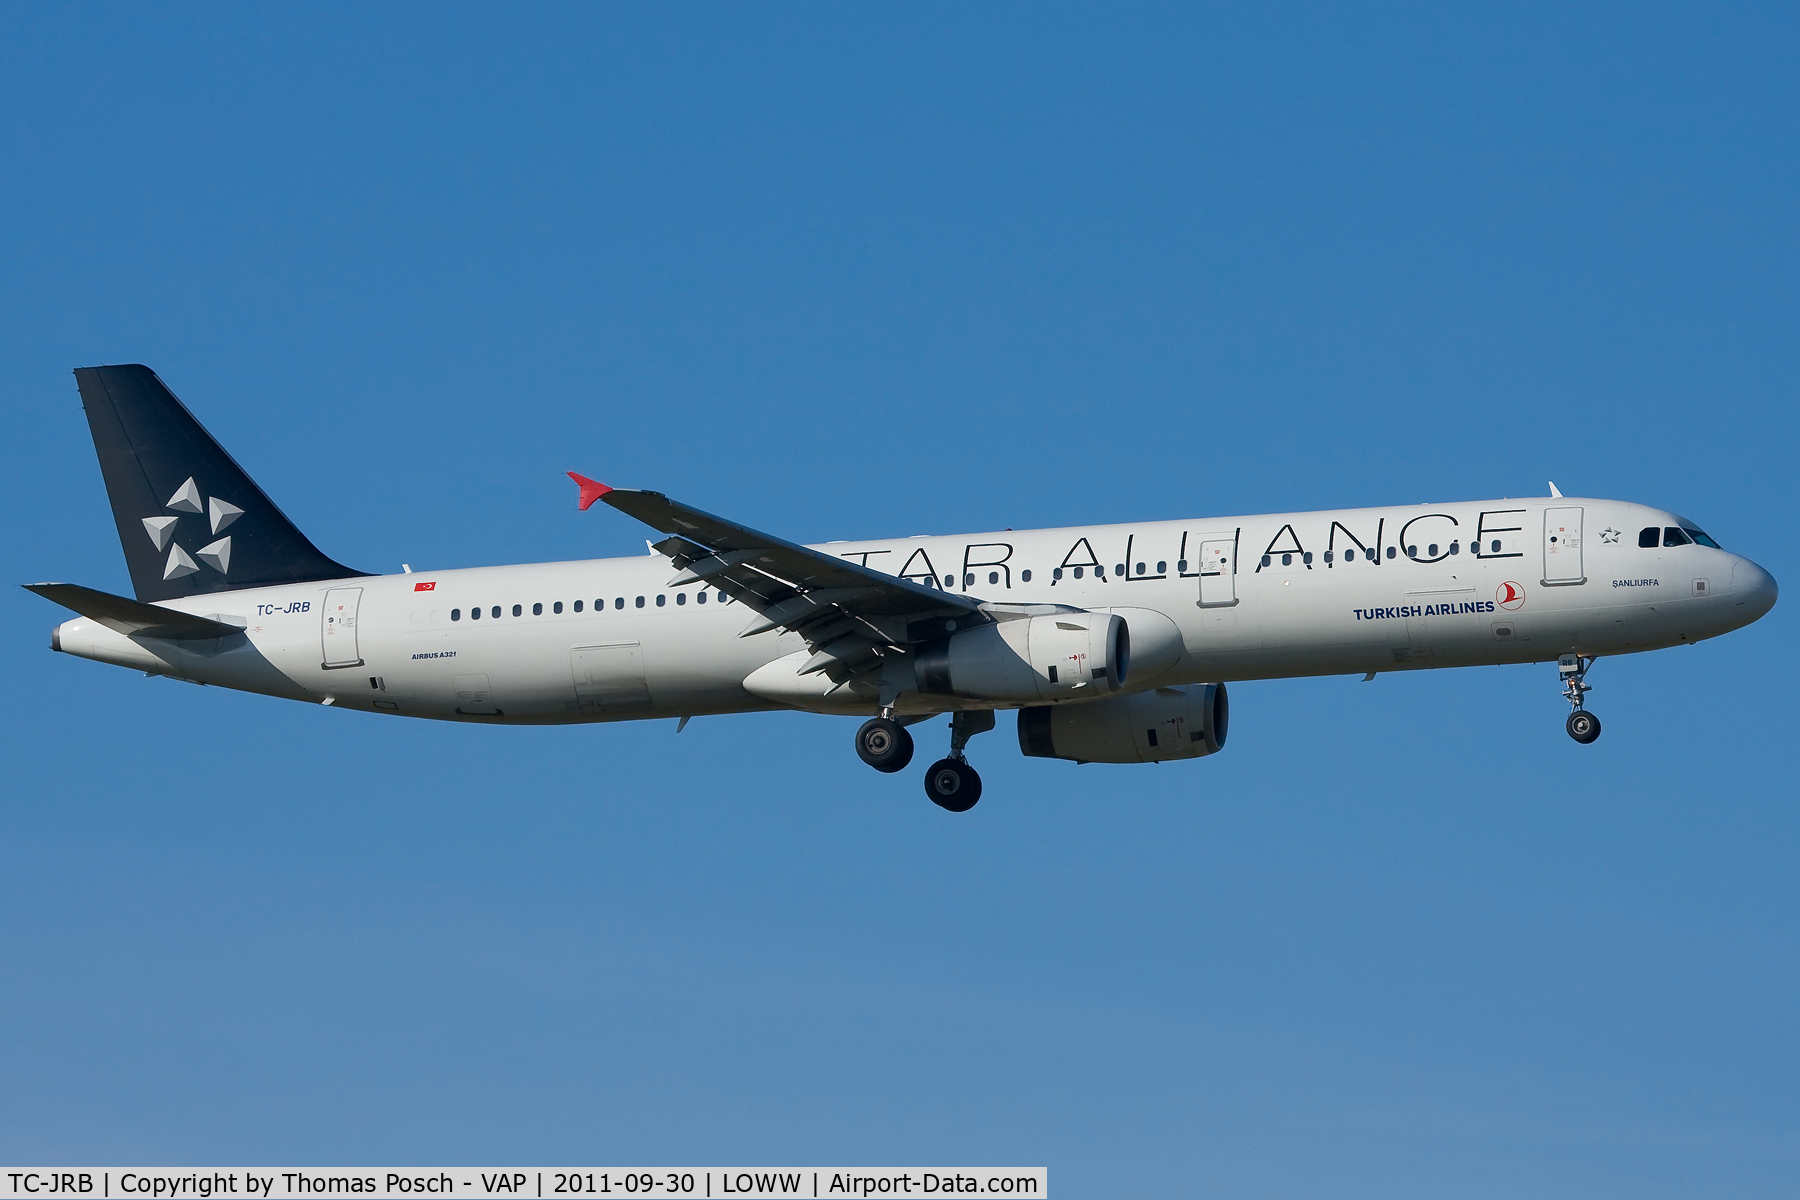 TC-JRB, 2006 Airbus A321-231 C/N 2868, Turkish Airlines